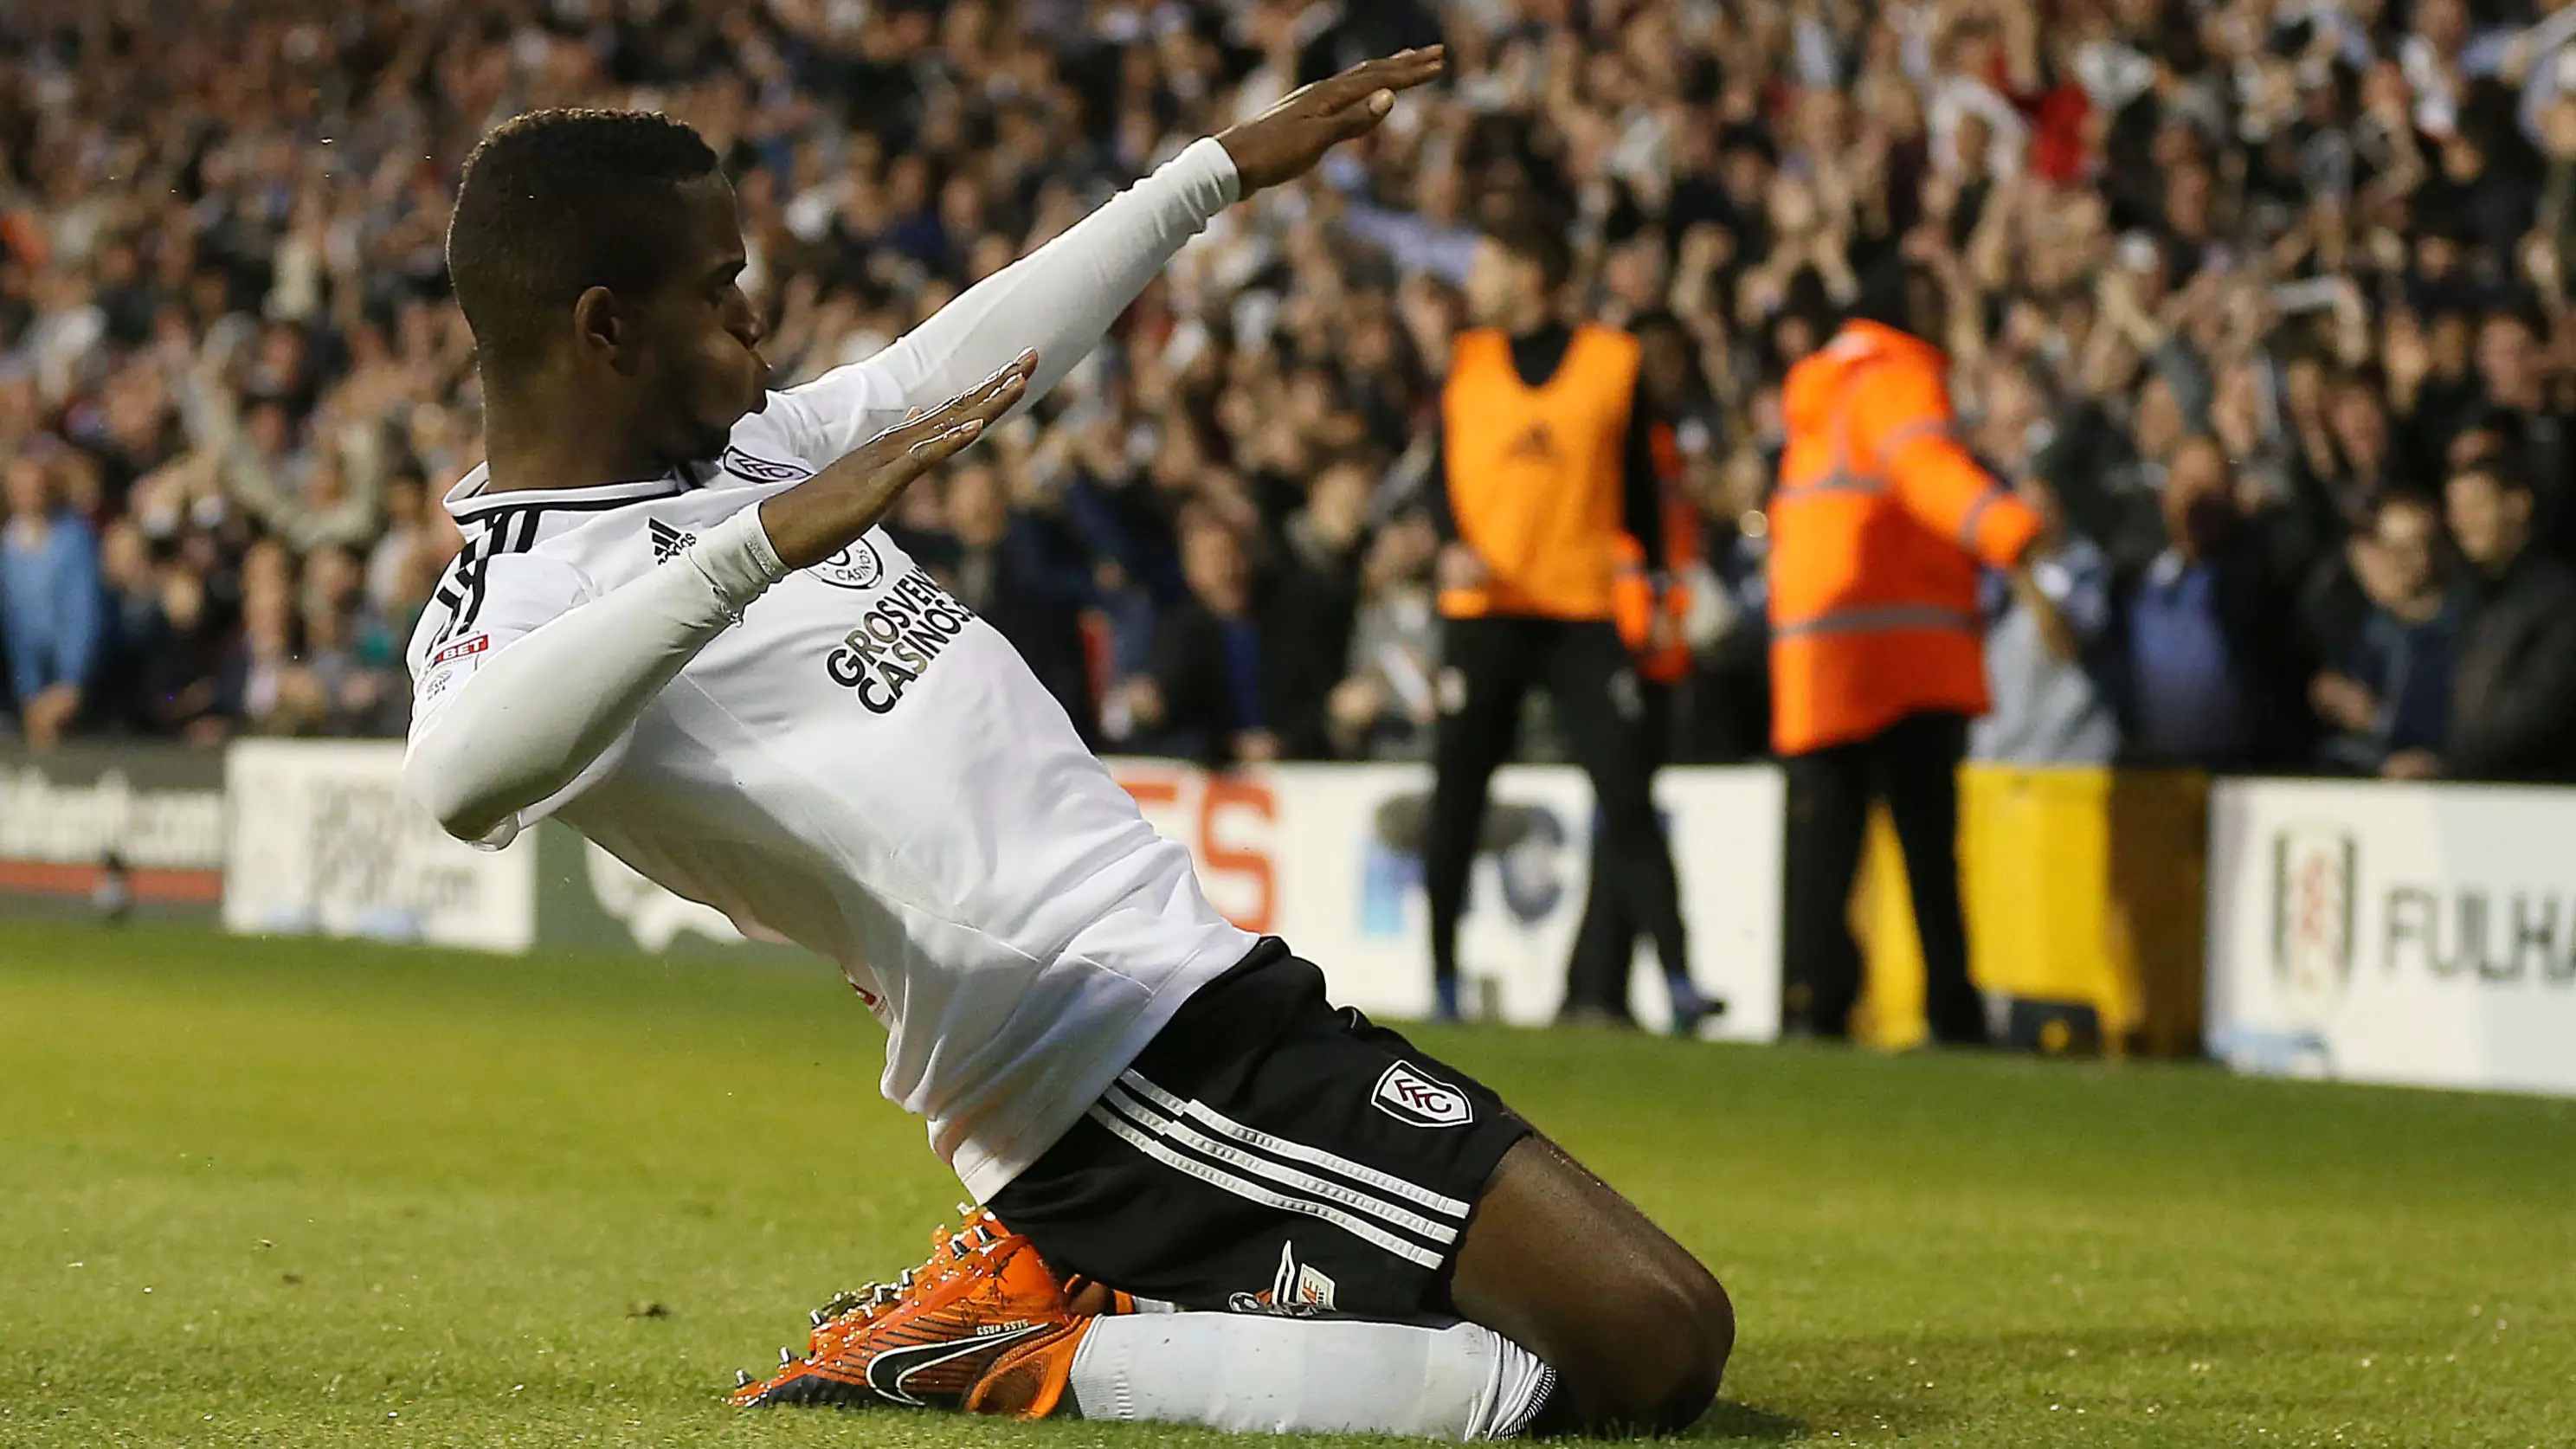 Exclusive Interview With Ryan Sessegnon: "I Haven't Made It As A Footballer Yet."